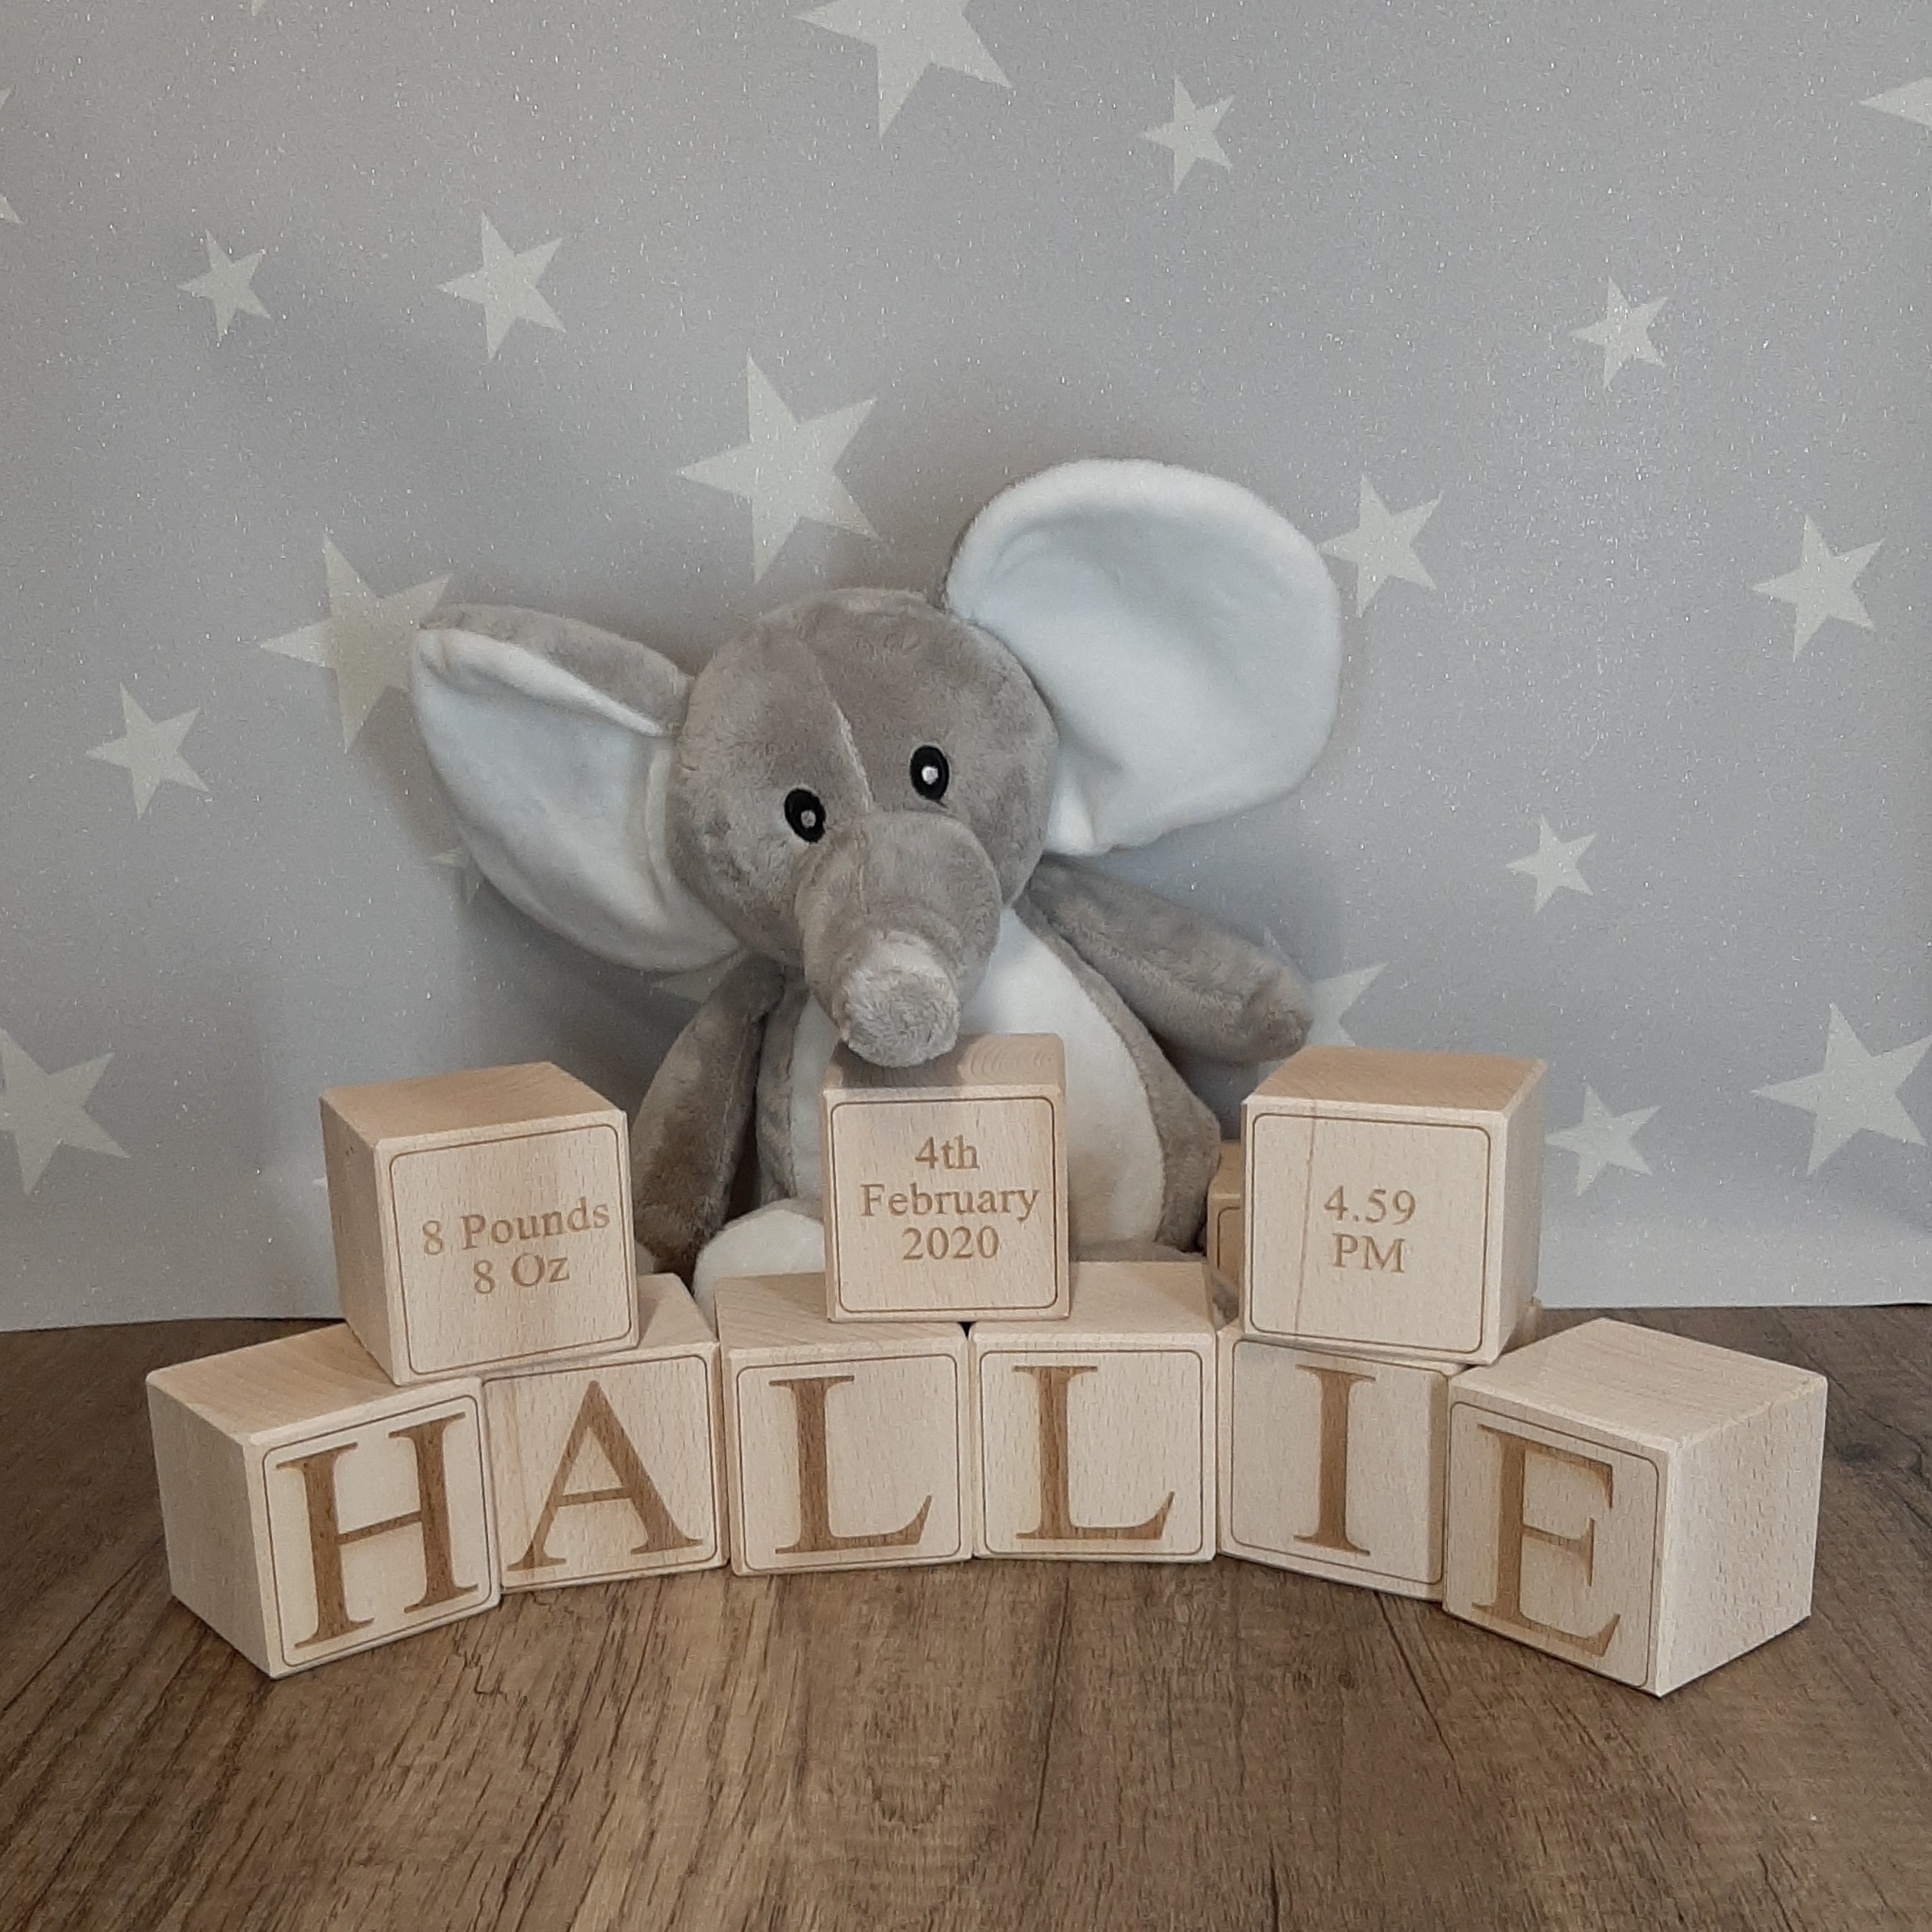 solid wooden personalised baby blocks with star wallpaper in nursery displaying footprints date of birth and weight details wooden solid baby blocks